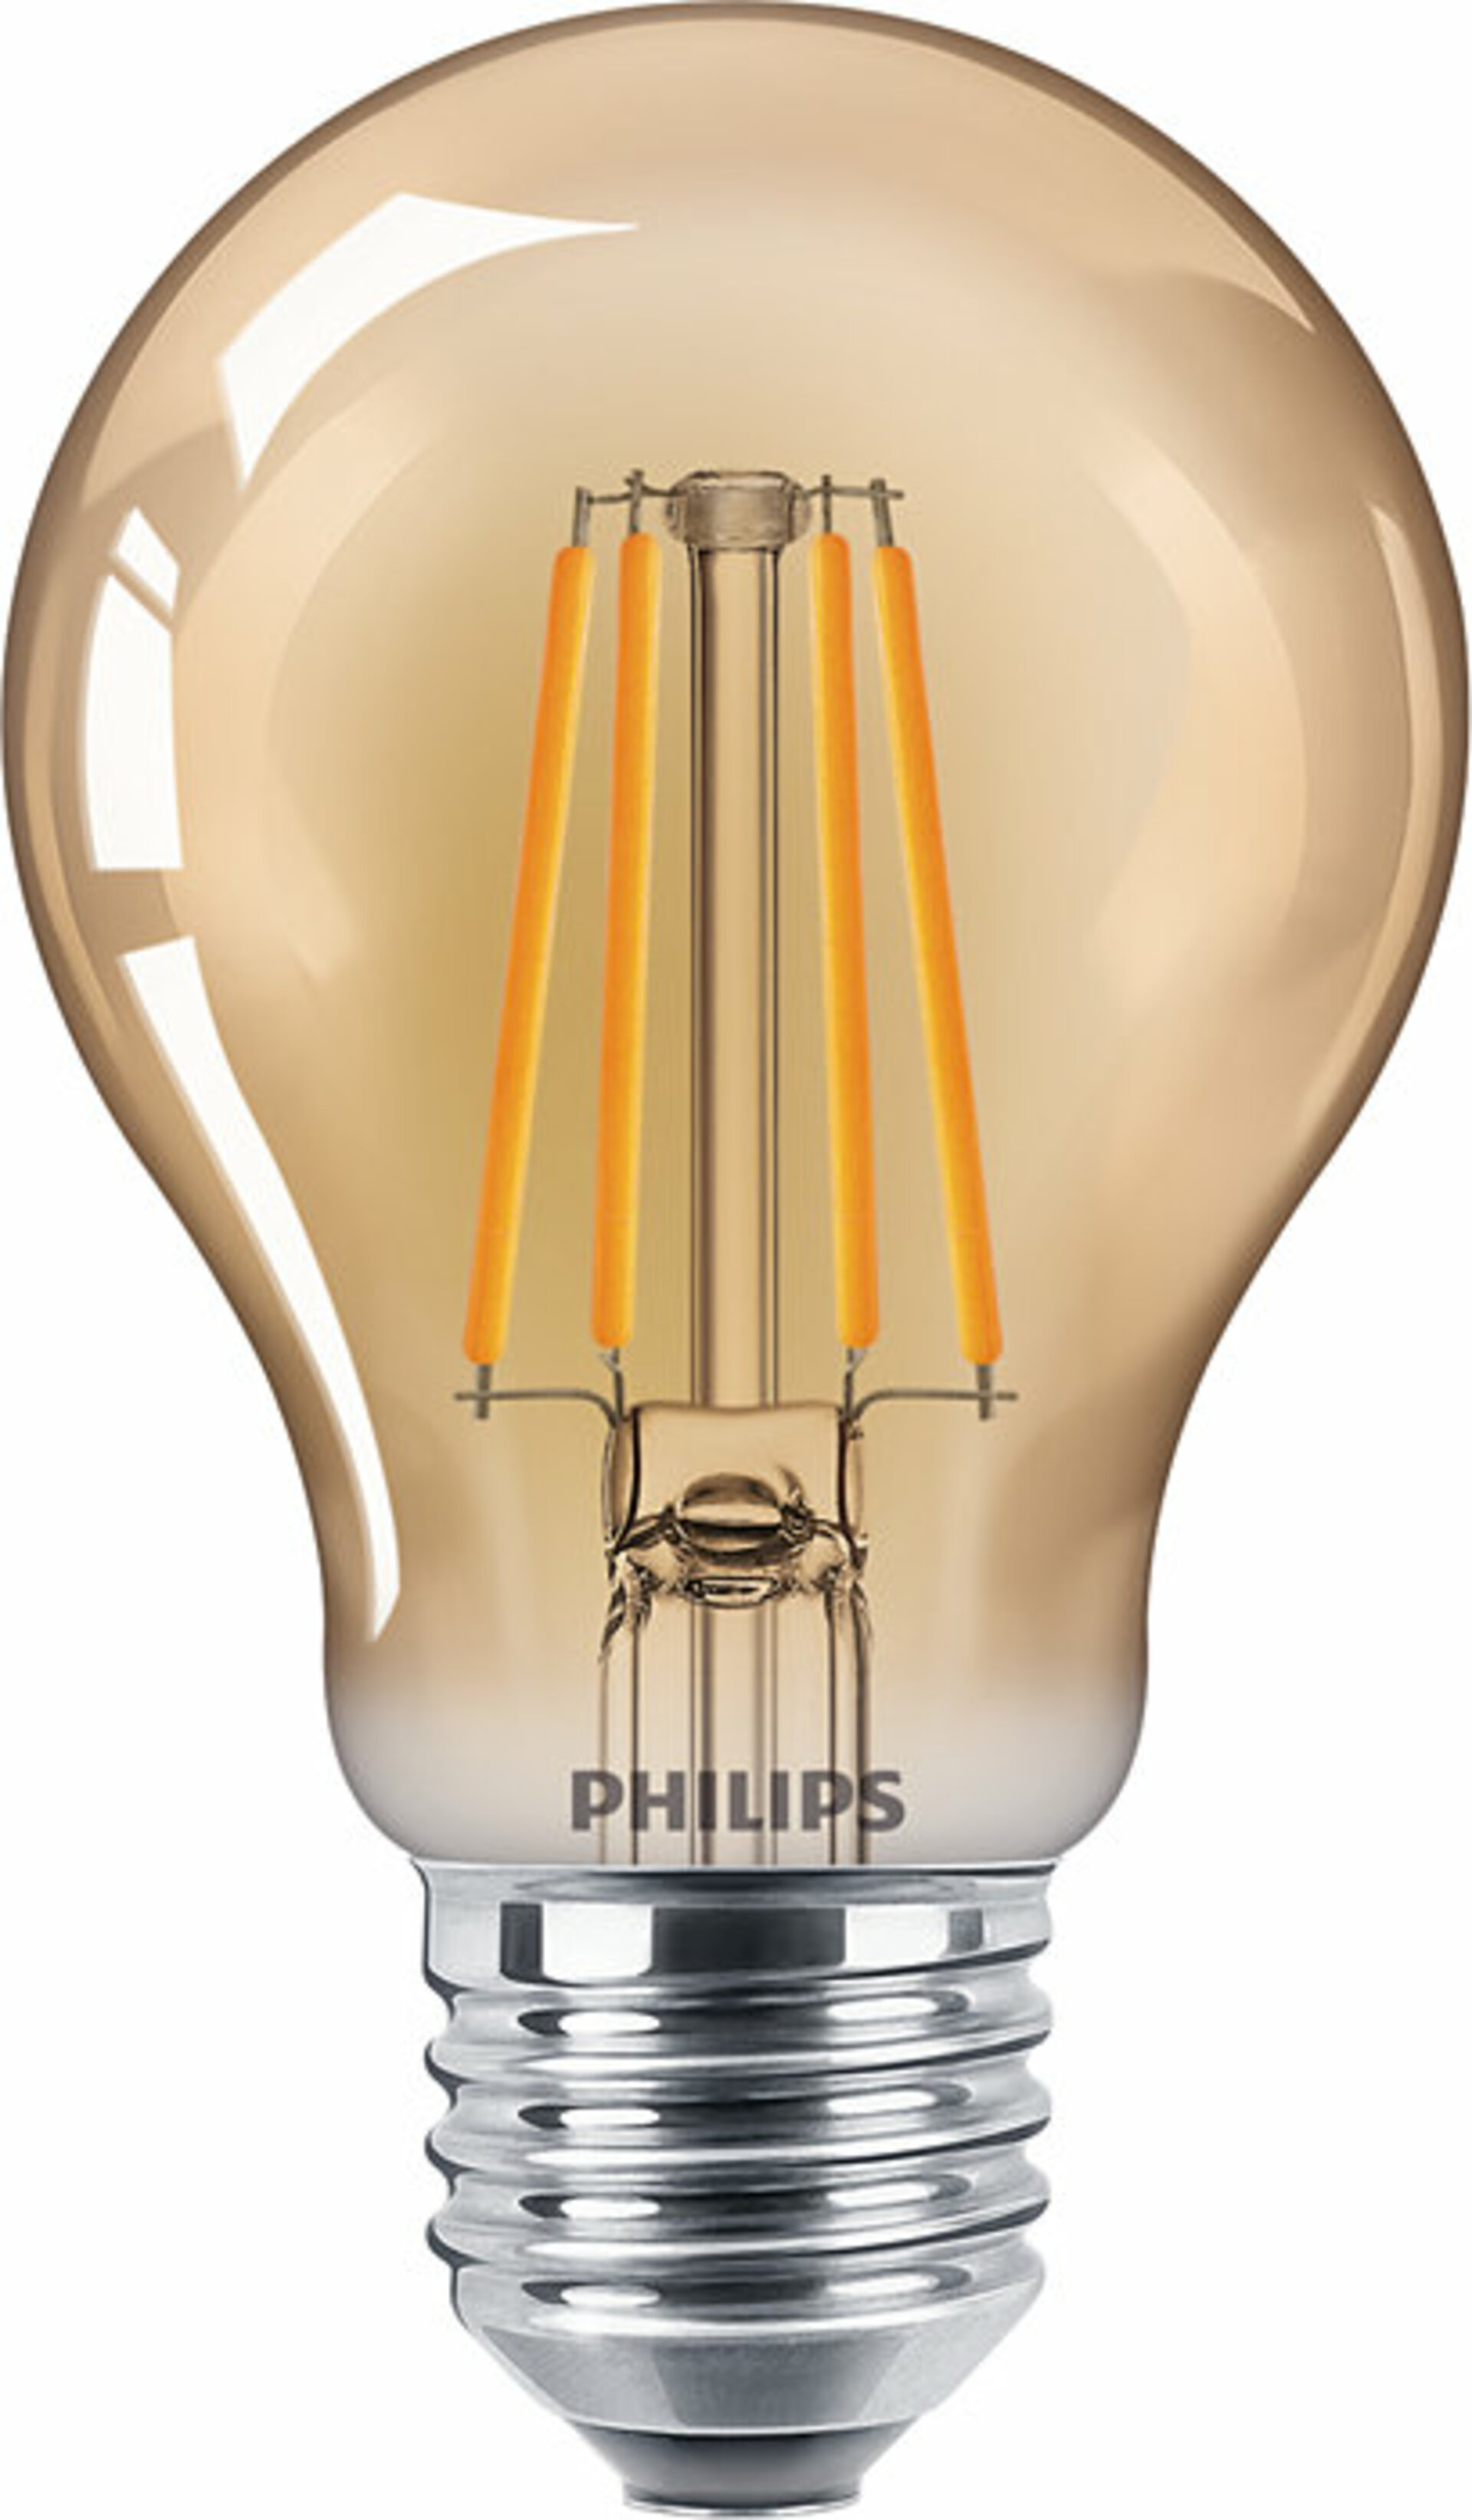 Philips LED Classic 35W A60 E27 825 GOLD ND